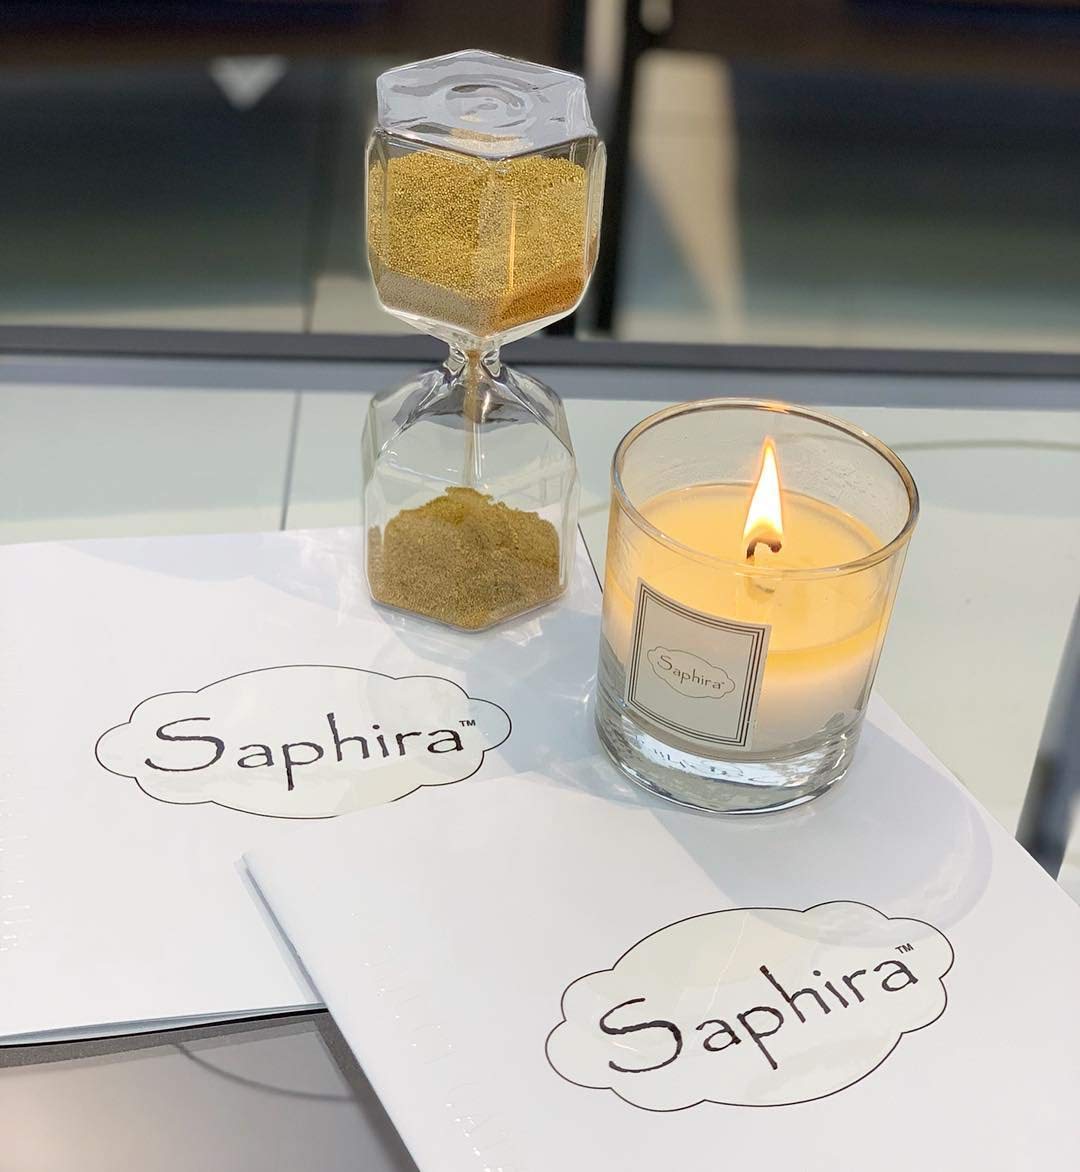 The Saphira Candle offers an aroma that is both calming and sensual.